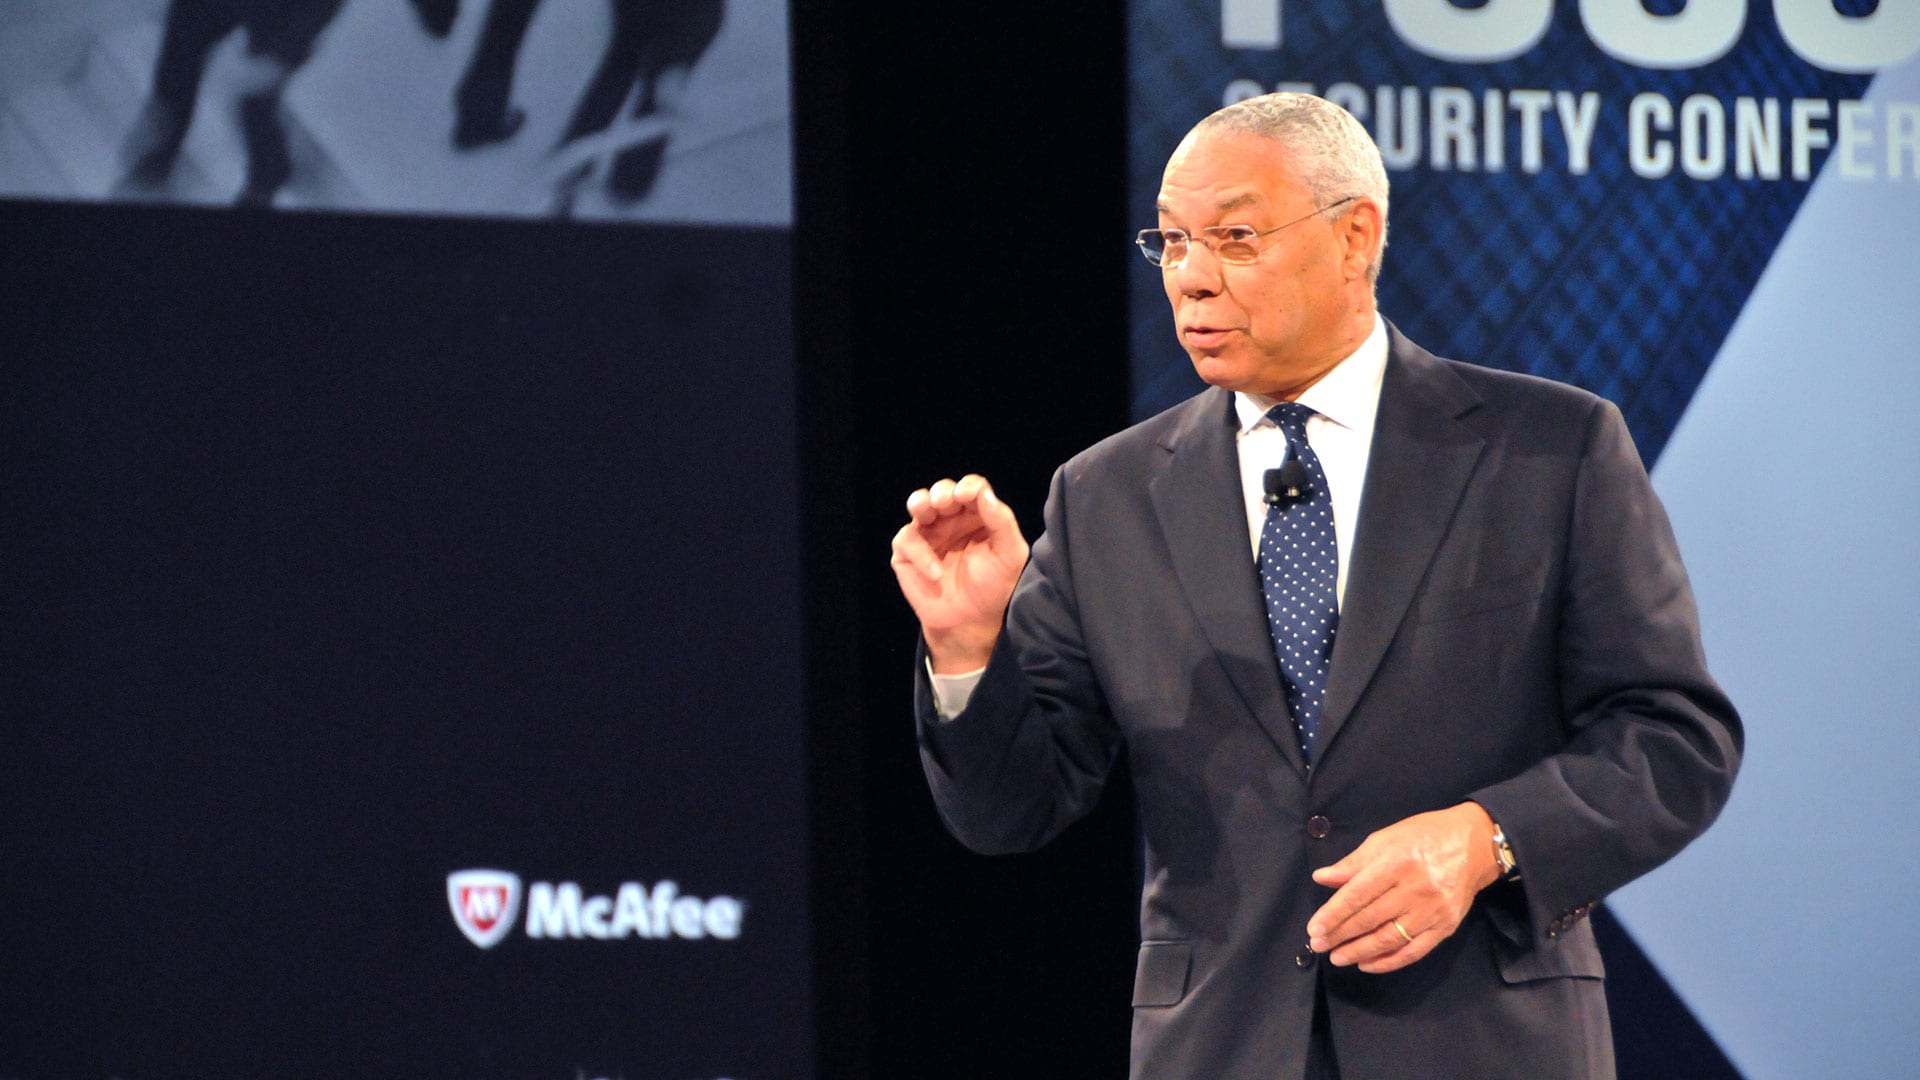 mcafee-colin-powell-focus-security-conference